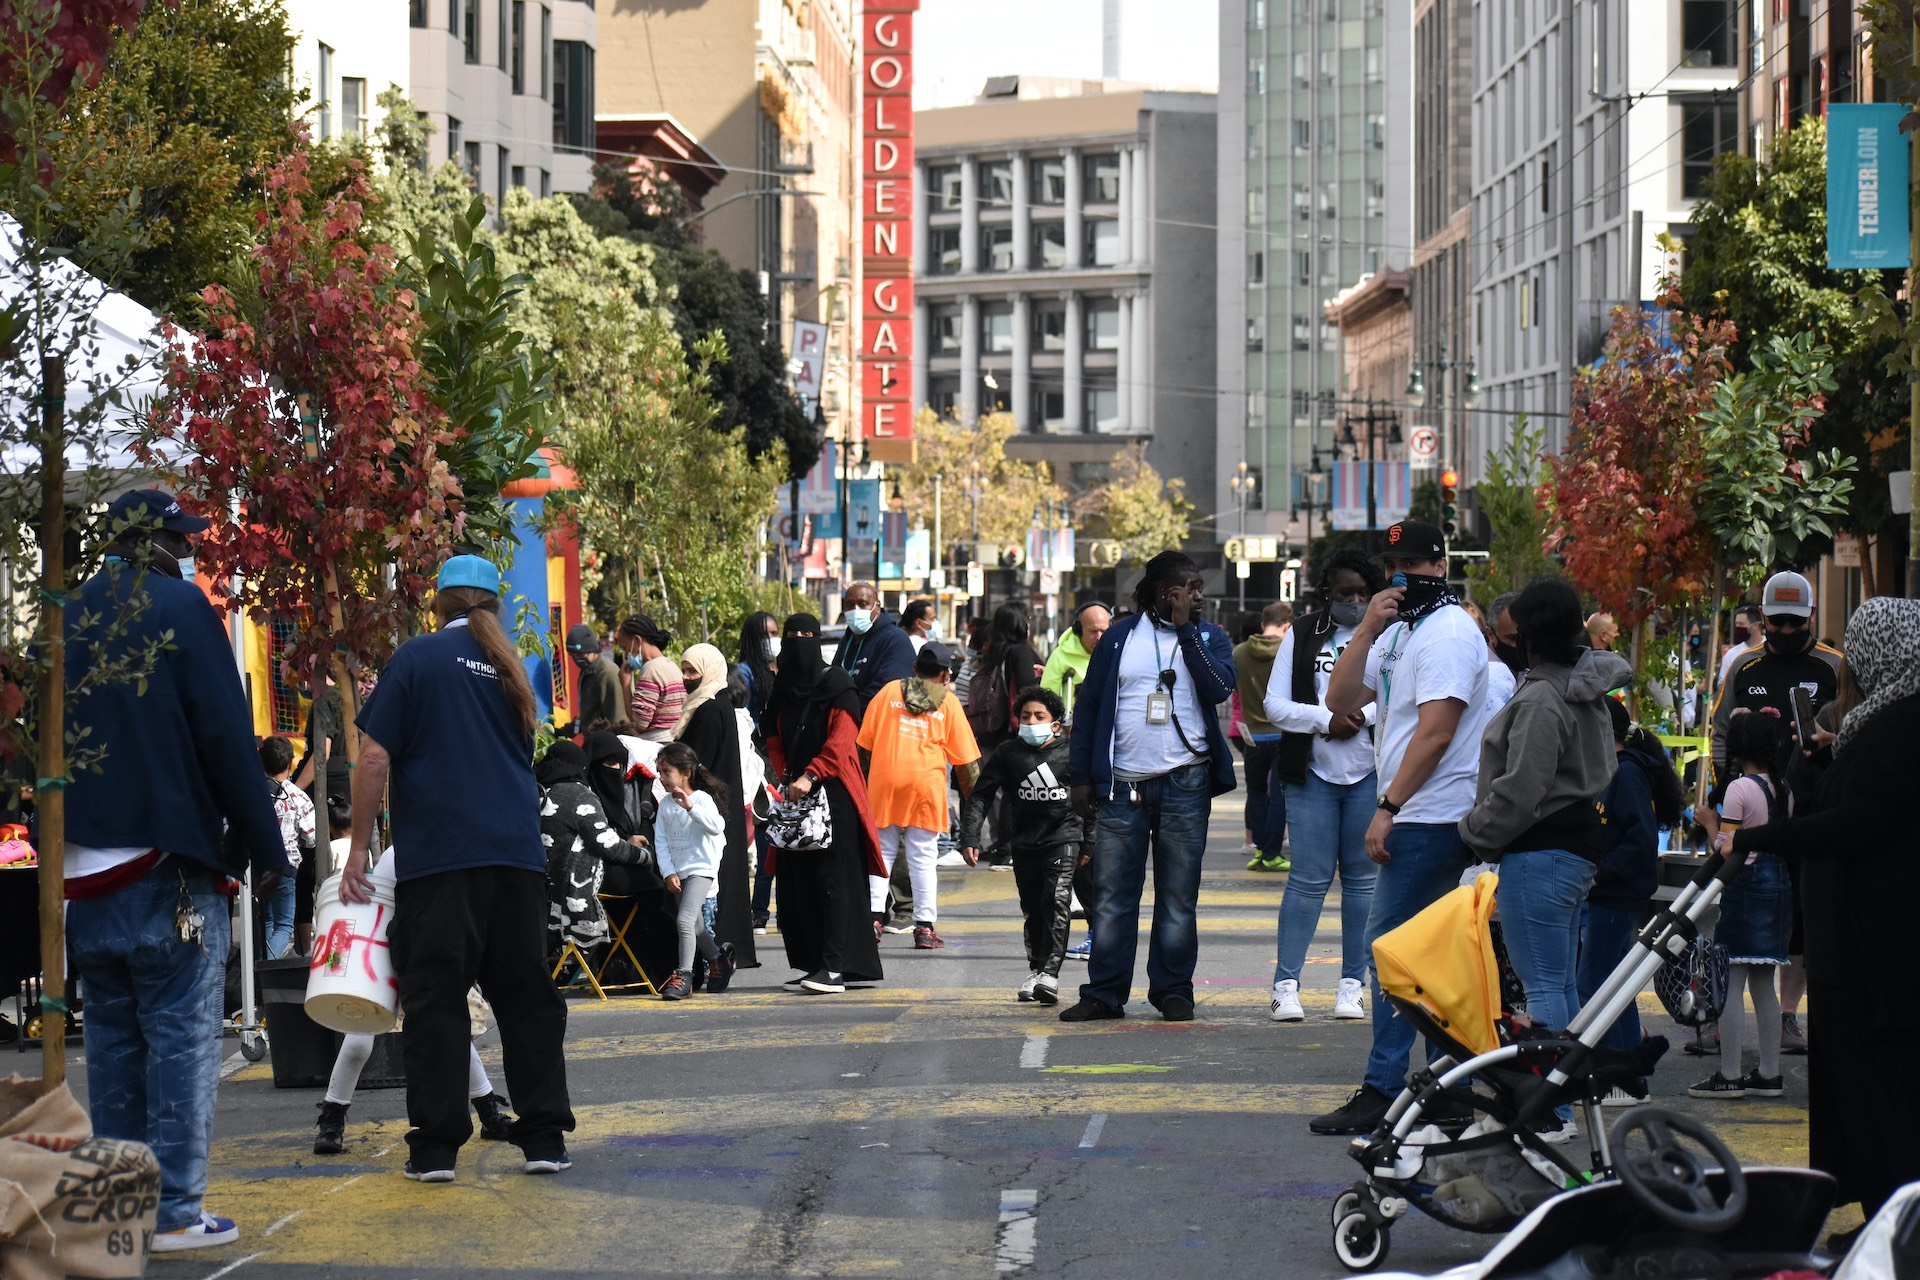 The Golden Gate Greenway Phase 1: Building Parklets and Positivity in the Tenderloin